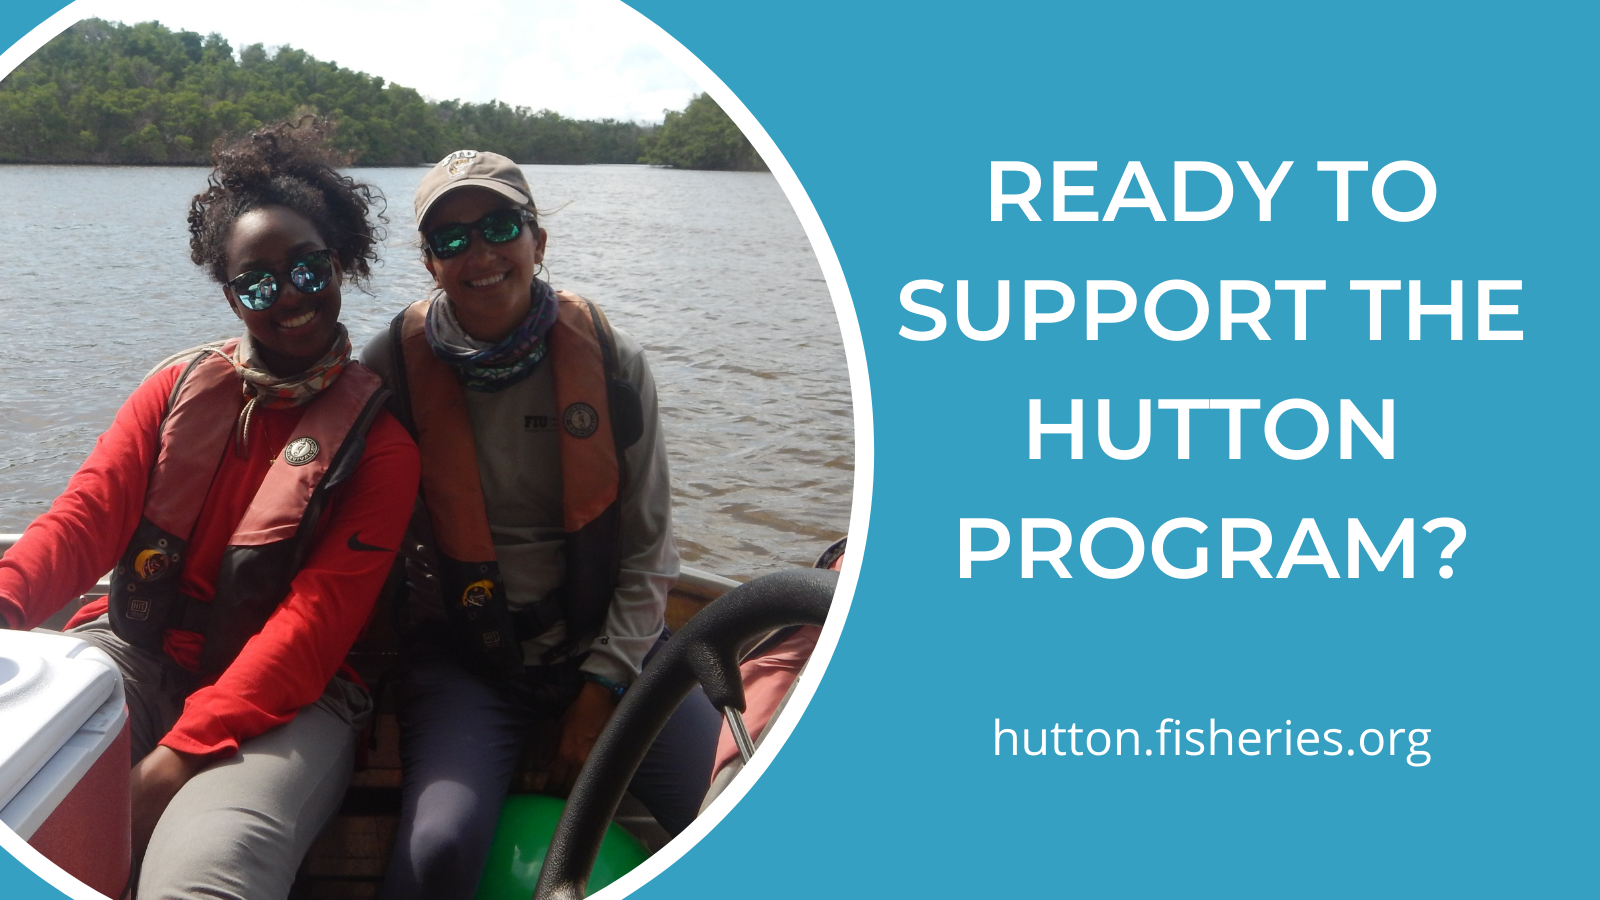 READY TO SUPPORT THE HUTTON PROGRAM